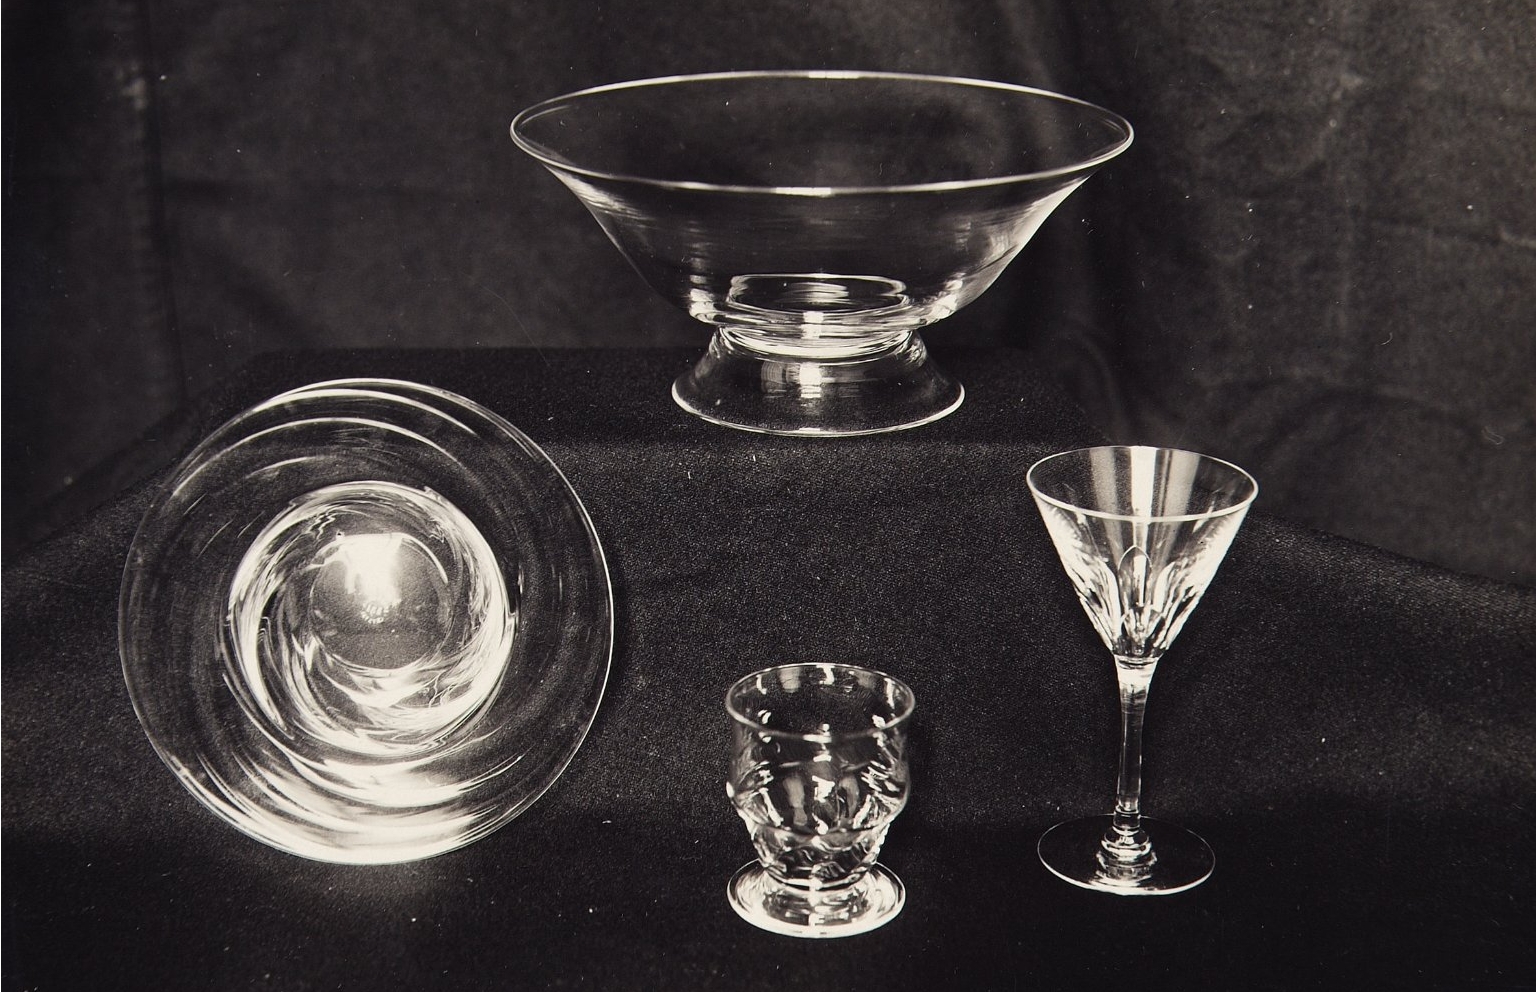 Black and white photo of a display case lined with dark cloth. Inside are four clear glass objects: form left to right, a wide bowl with swirling pattern, a clear wide bowl, a short and stout cup with textured ridges, and a wine glass.